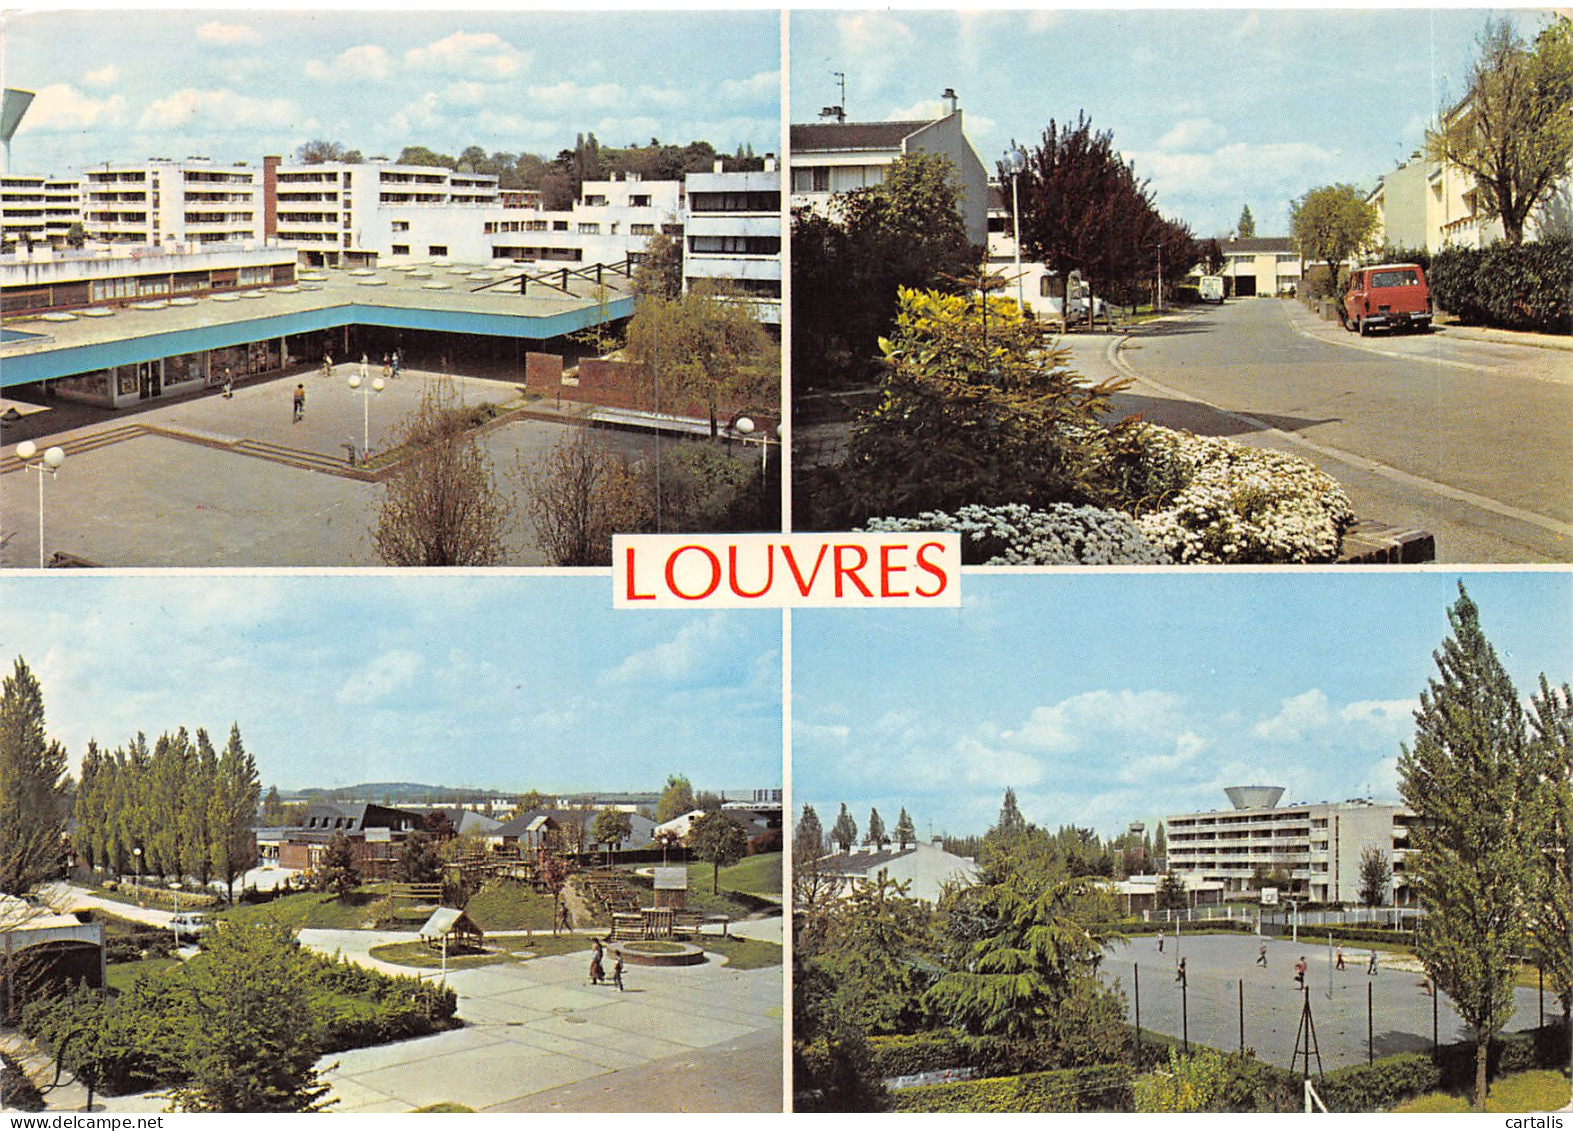 95-LOUVRES-N 595-C/0095 - Louvres